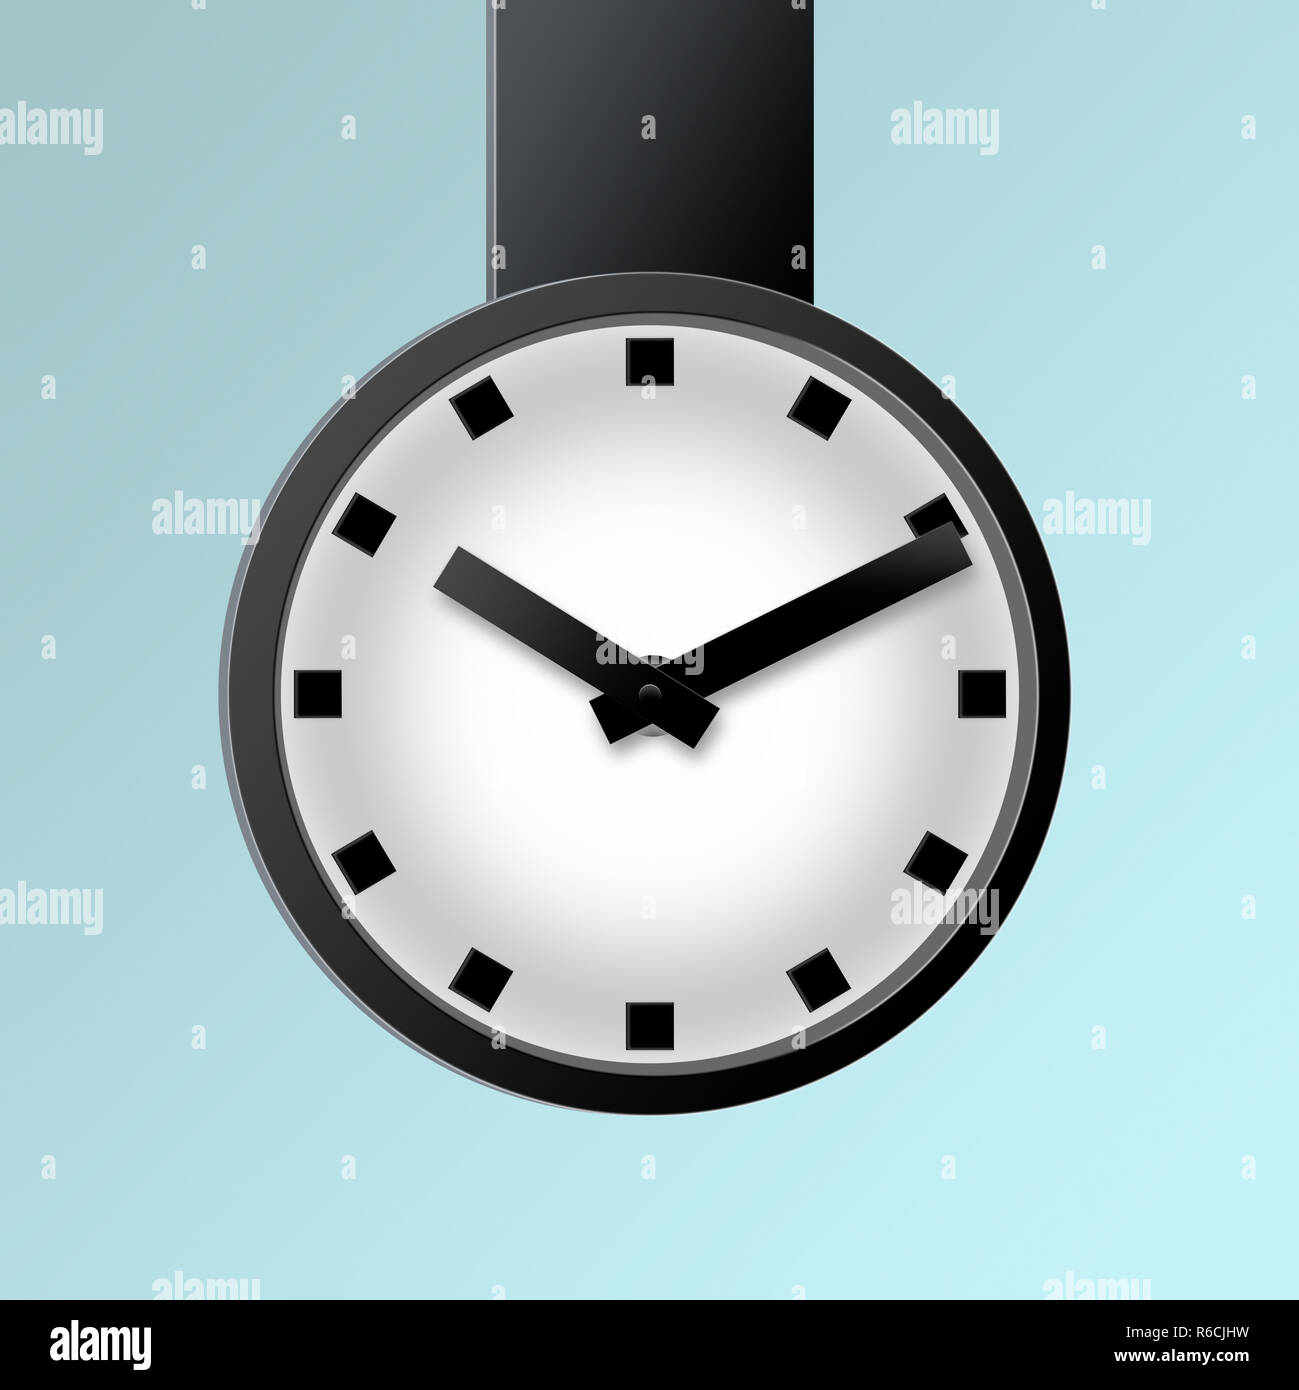 Digital illustration of simple large public hanging clock in black and white with a pale background Stock Photo